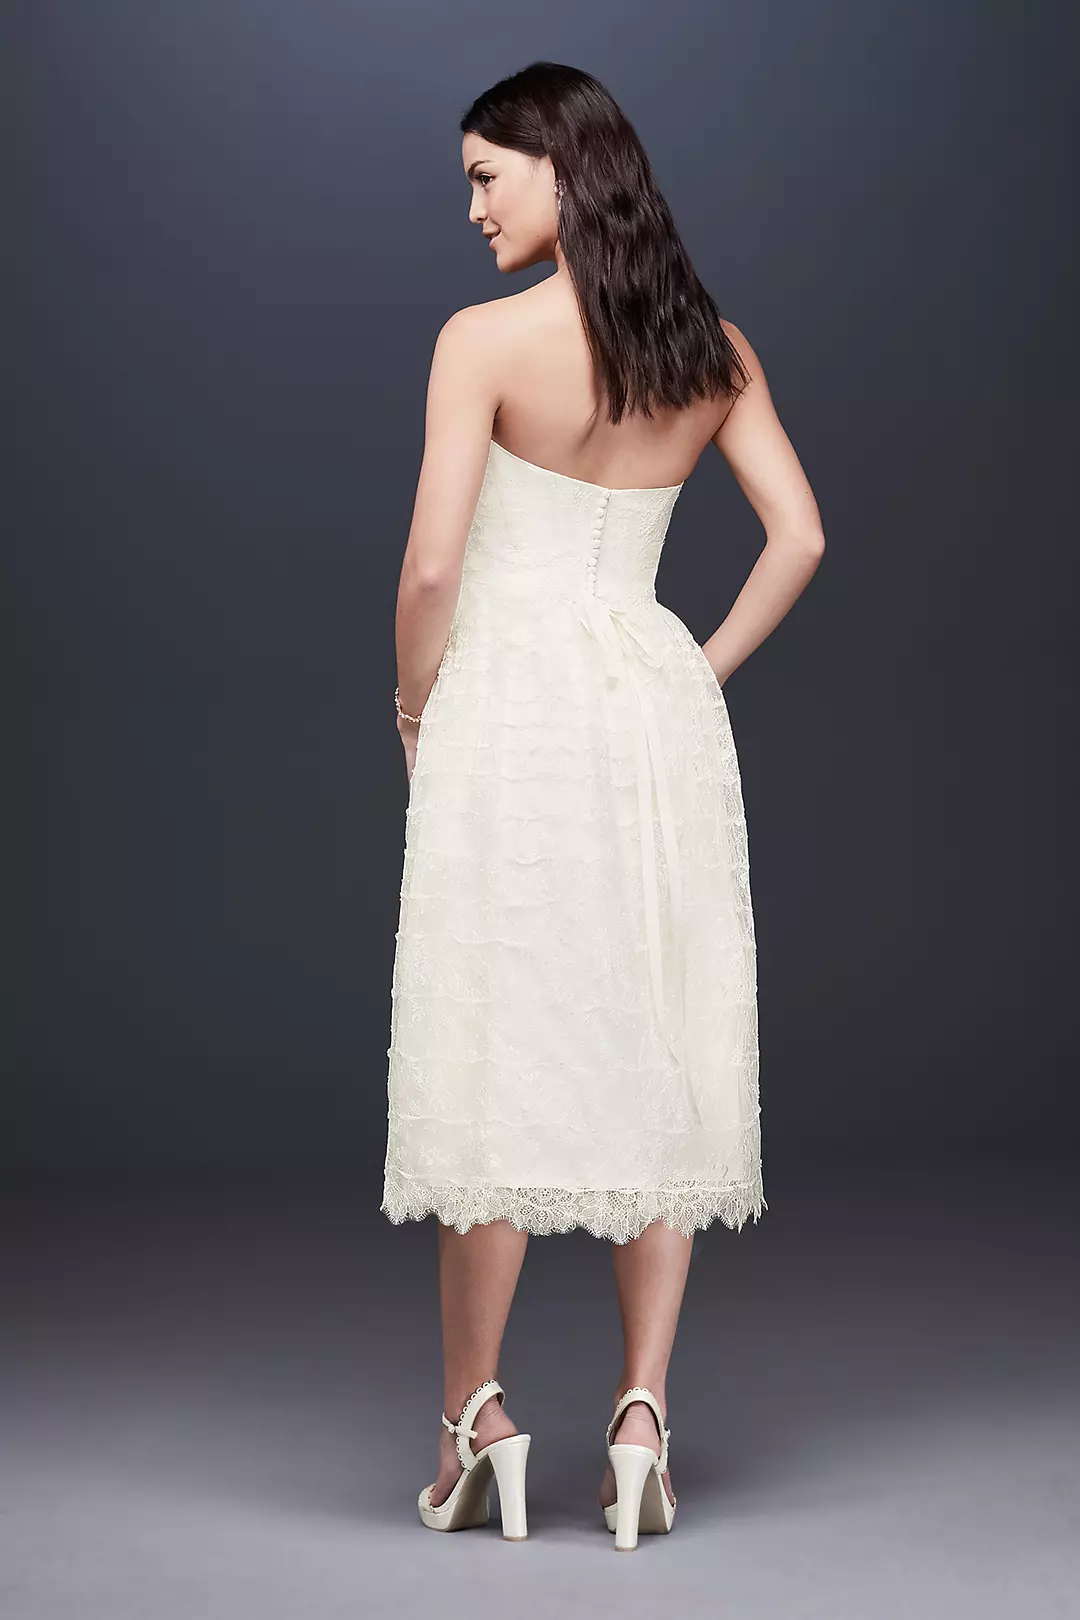 As-Is Short Lace Wedding Dress Image 2